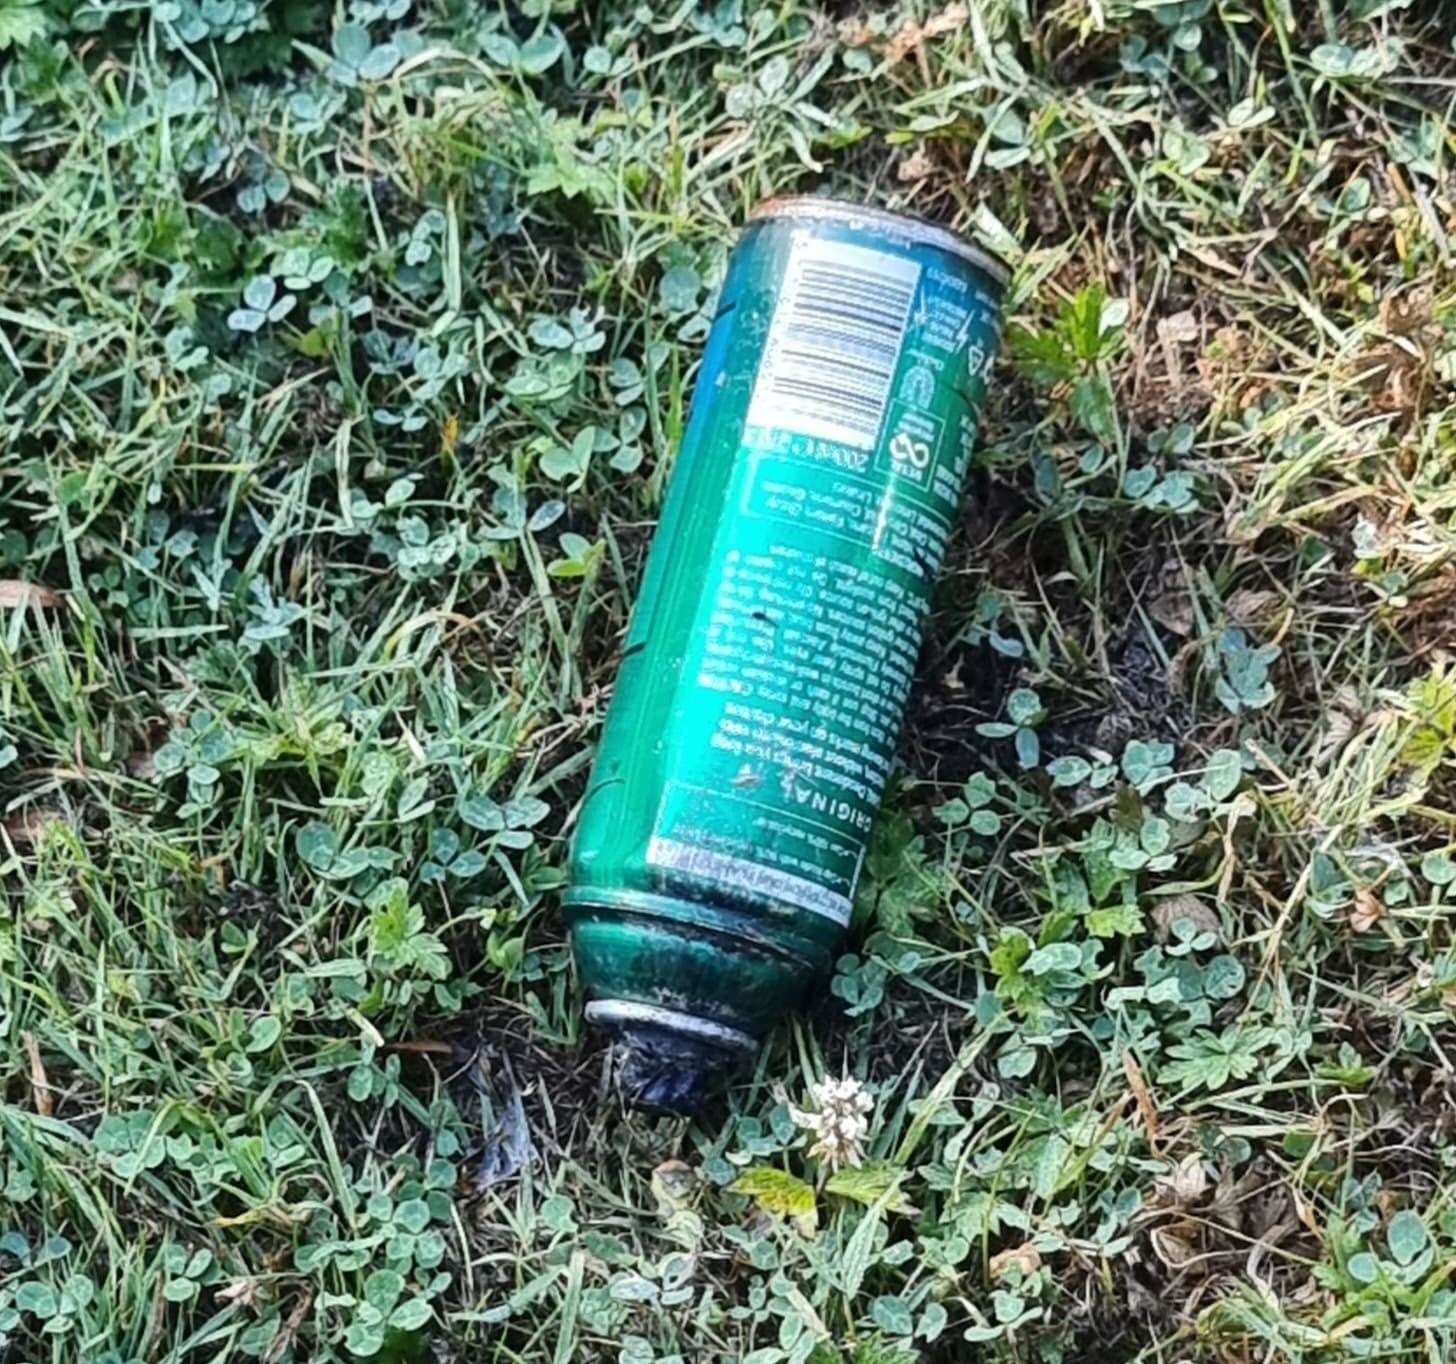 A deodorant can was also found on the field